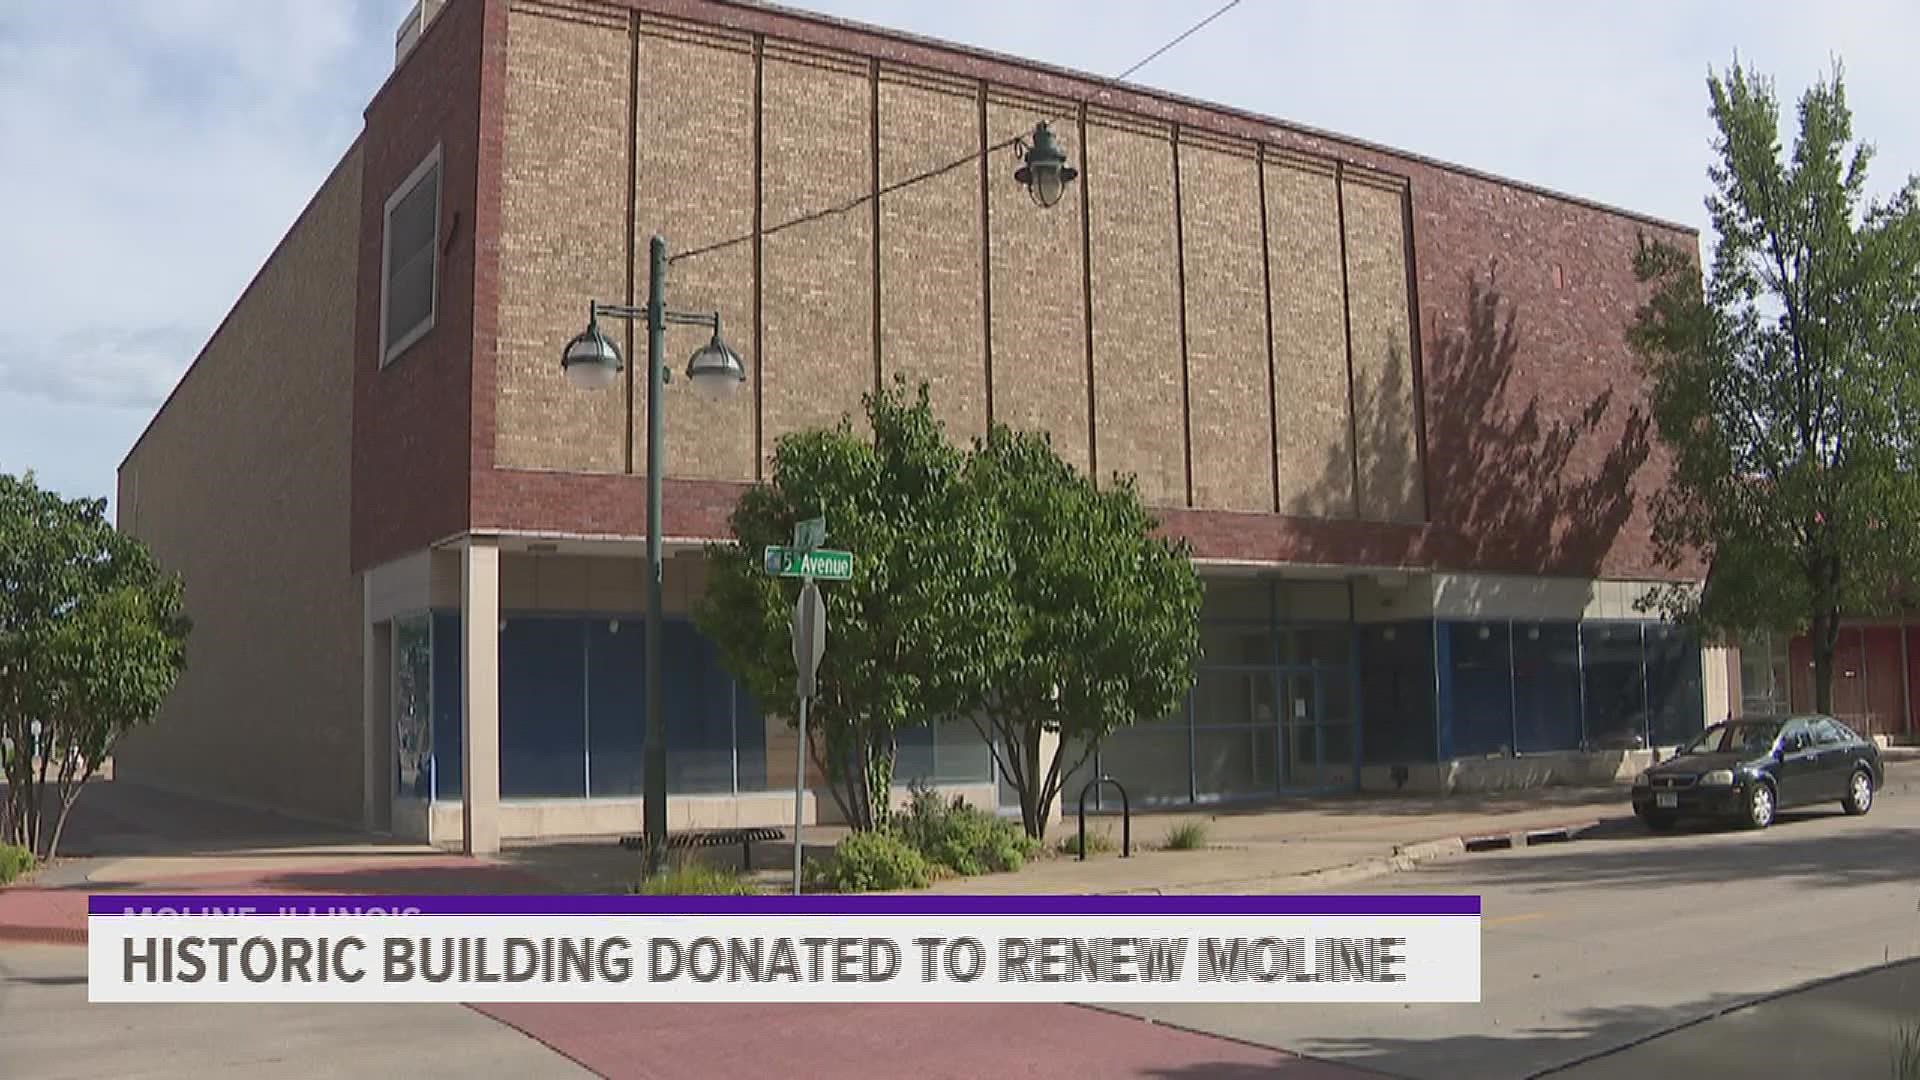 Riverstone Donates Old Jc Penney Building To Renew Moline